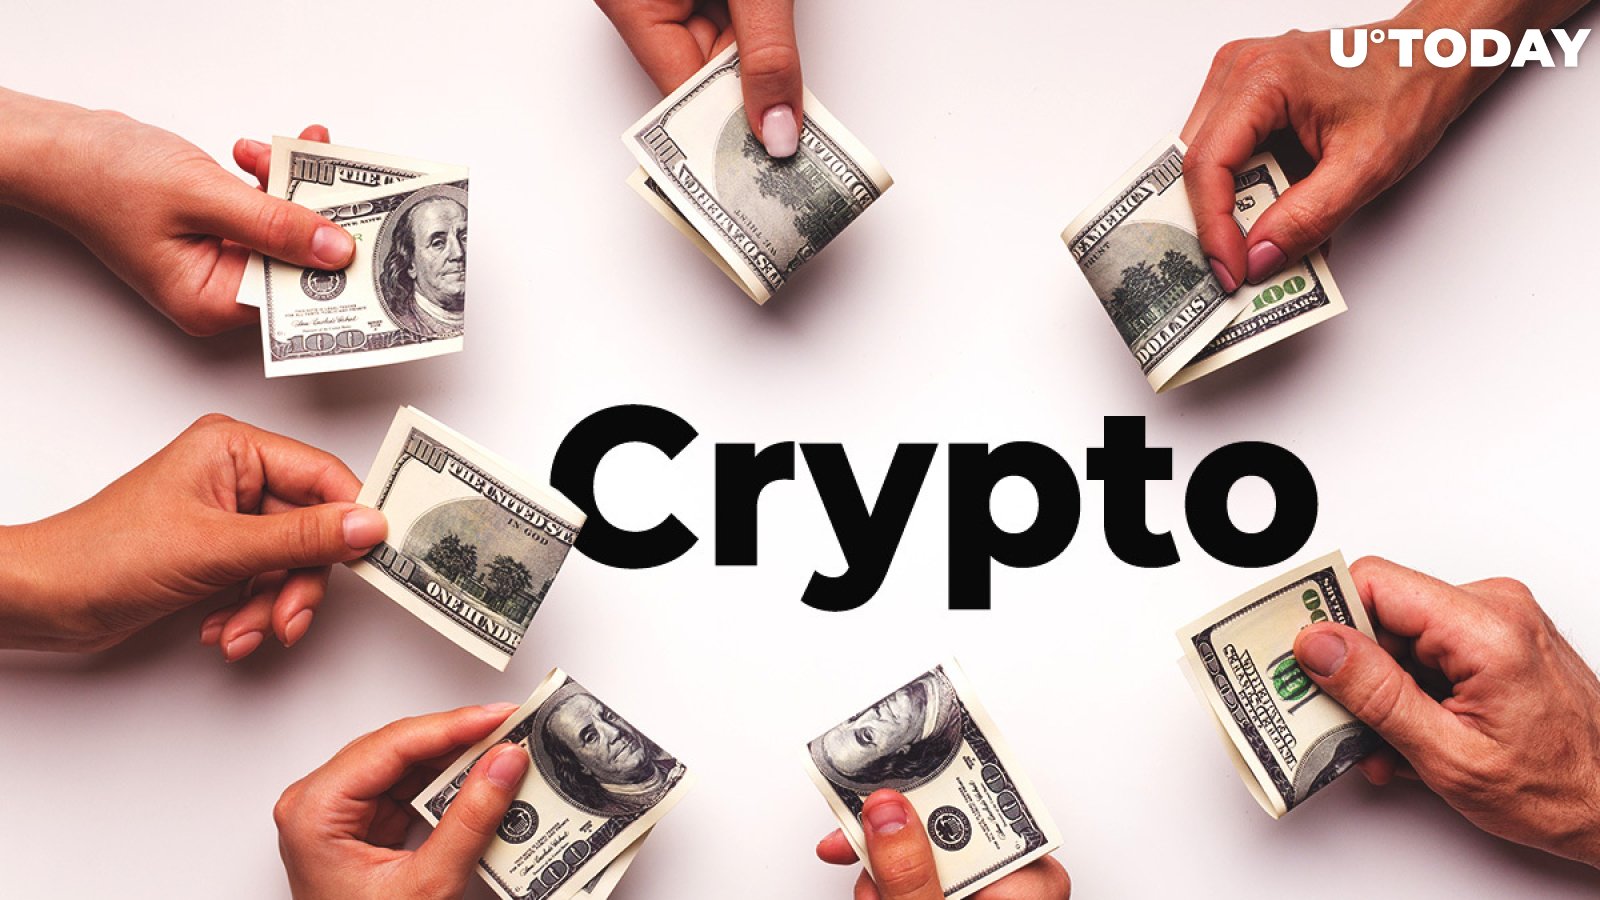 Crypto Fundraising Took Massive Hit in 2019, PwC Report Shows. Will 2020 Be Even Worse?